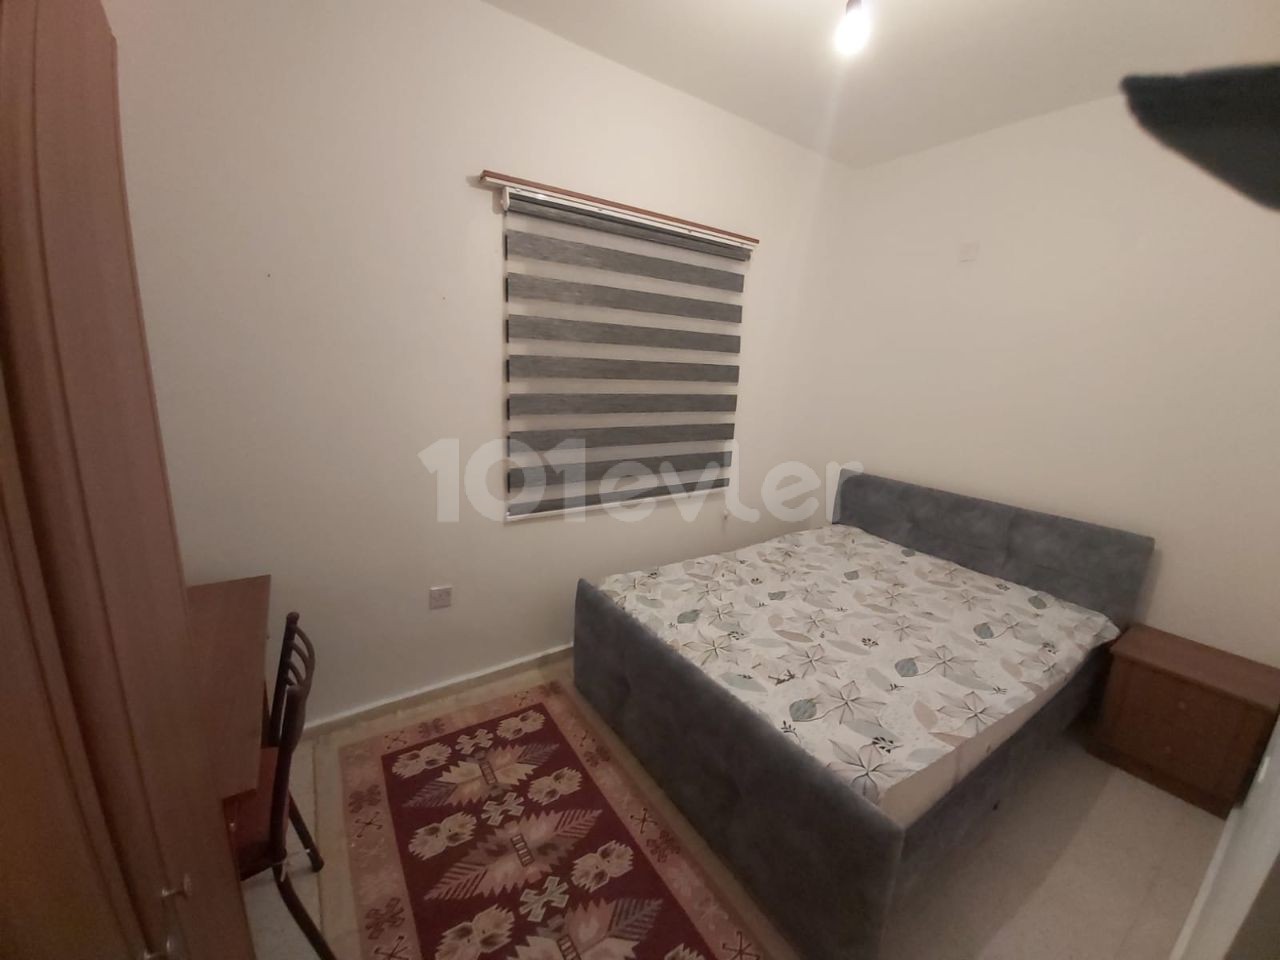 Famagusta Tuzla Bay 2+1 3 furnished flat for rent vacant 6 months or annual payment Rent from 12,000 TL for annual payment from 300 TL for 6 months rental